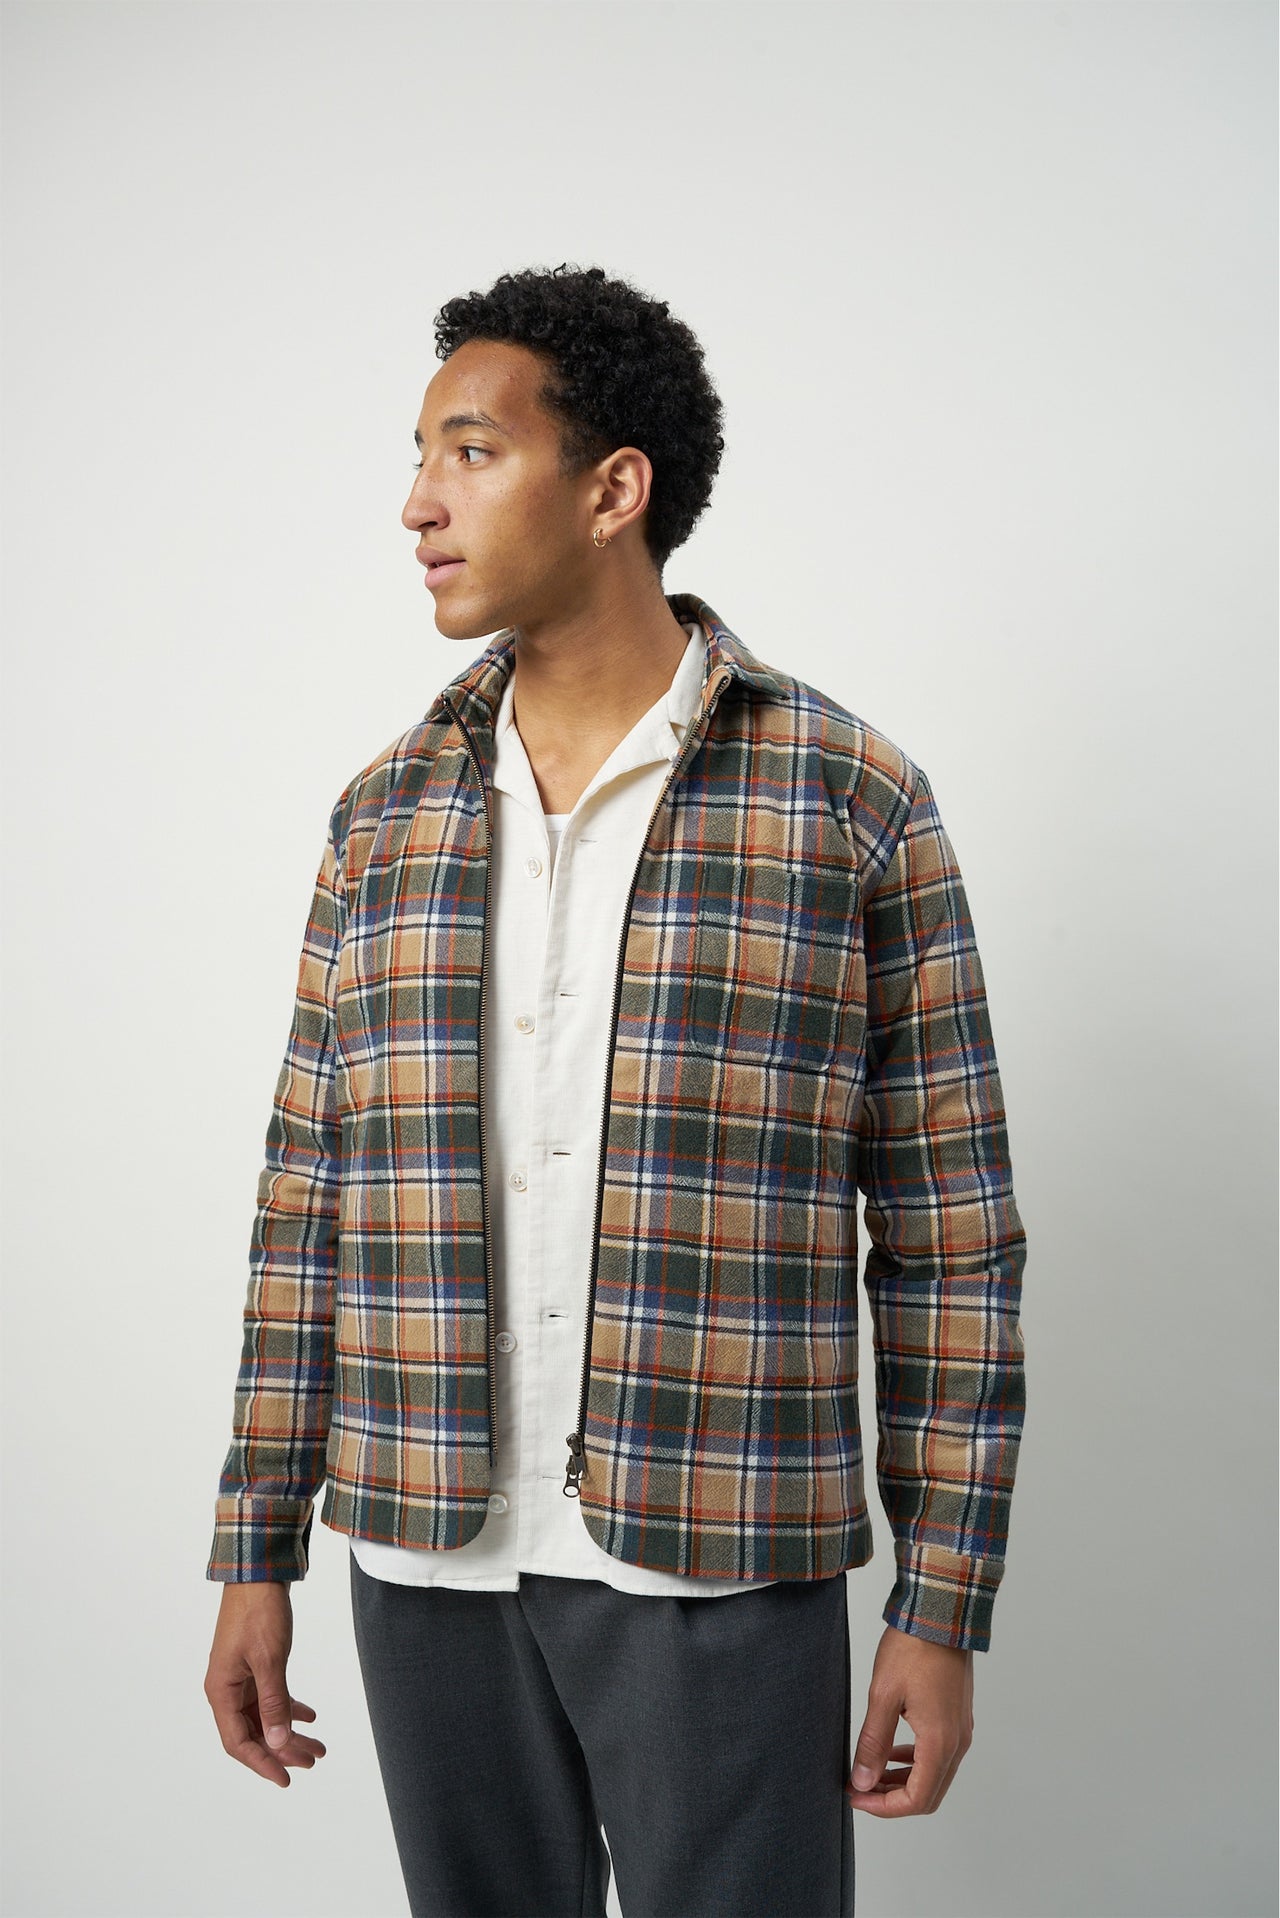 Insulated Jacket in a Chequered Green, Beige, Navy and Orange Soft High End Italian Virgin Wool with Freudenberg Insulation